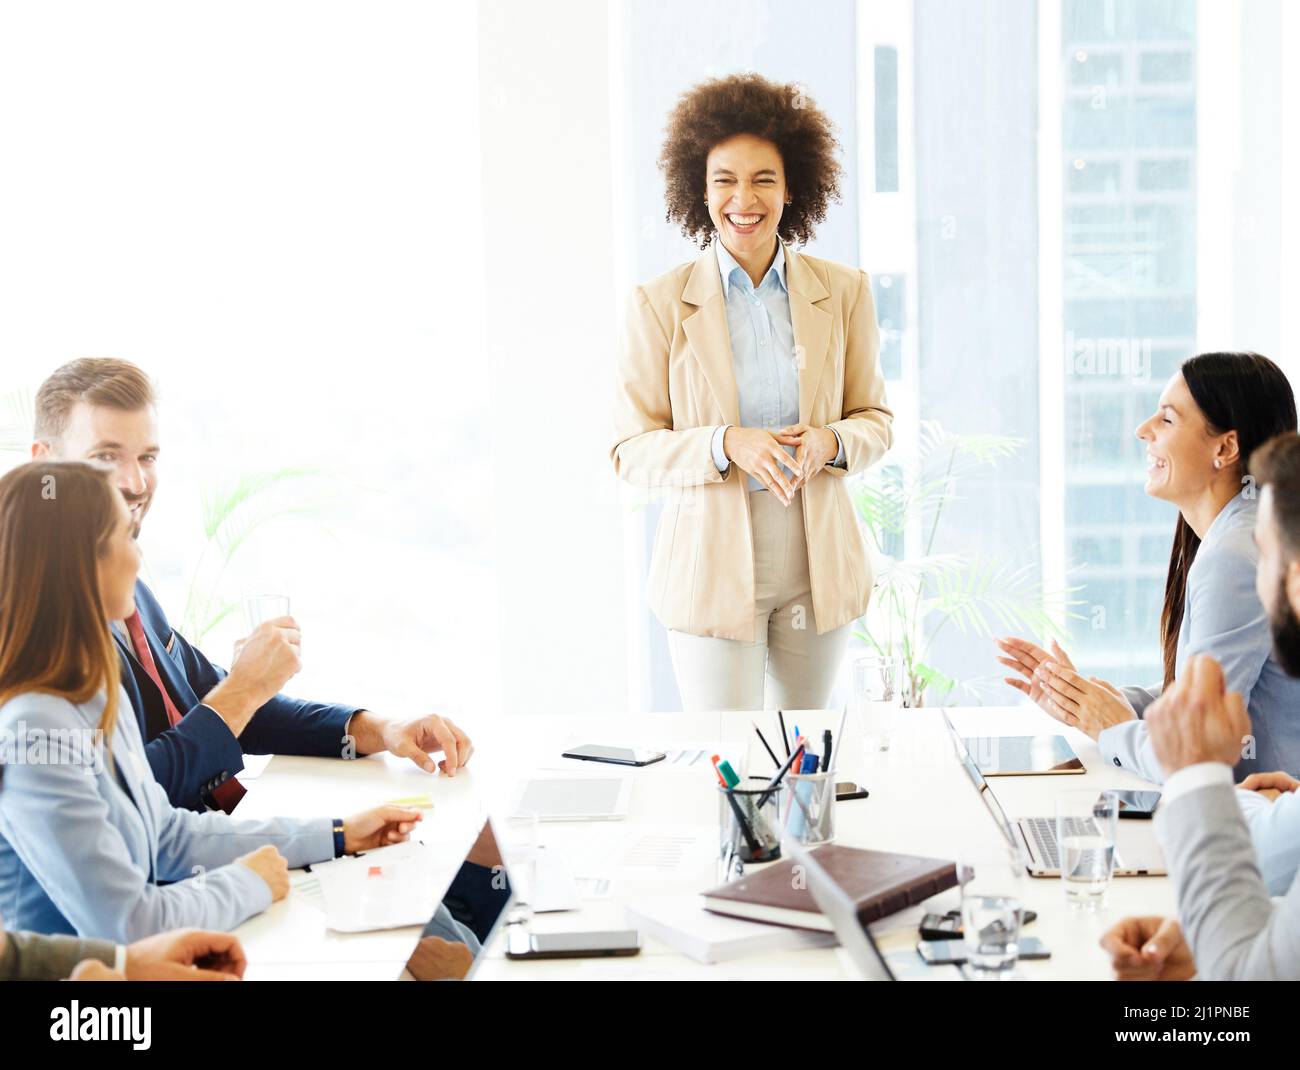 young business people meeting office teamwork group success corporate discussion Stock Photo